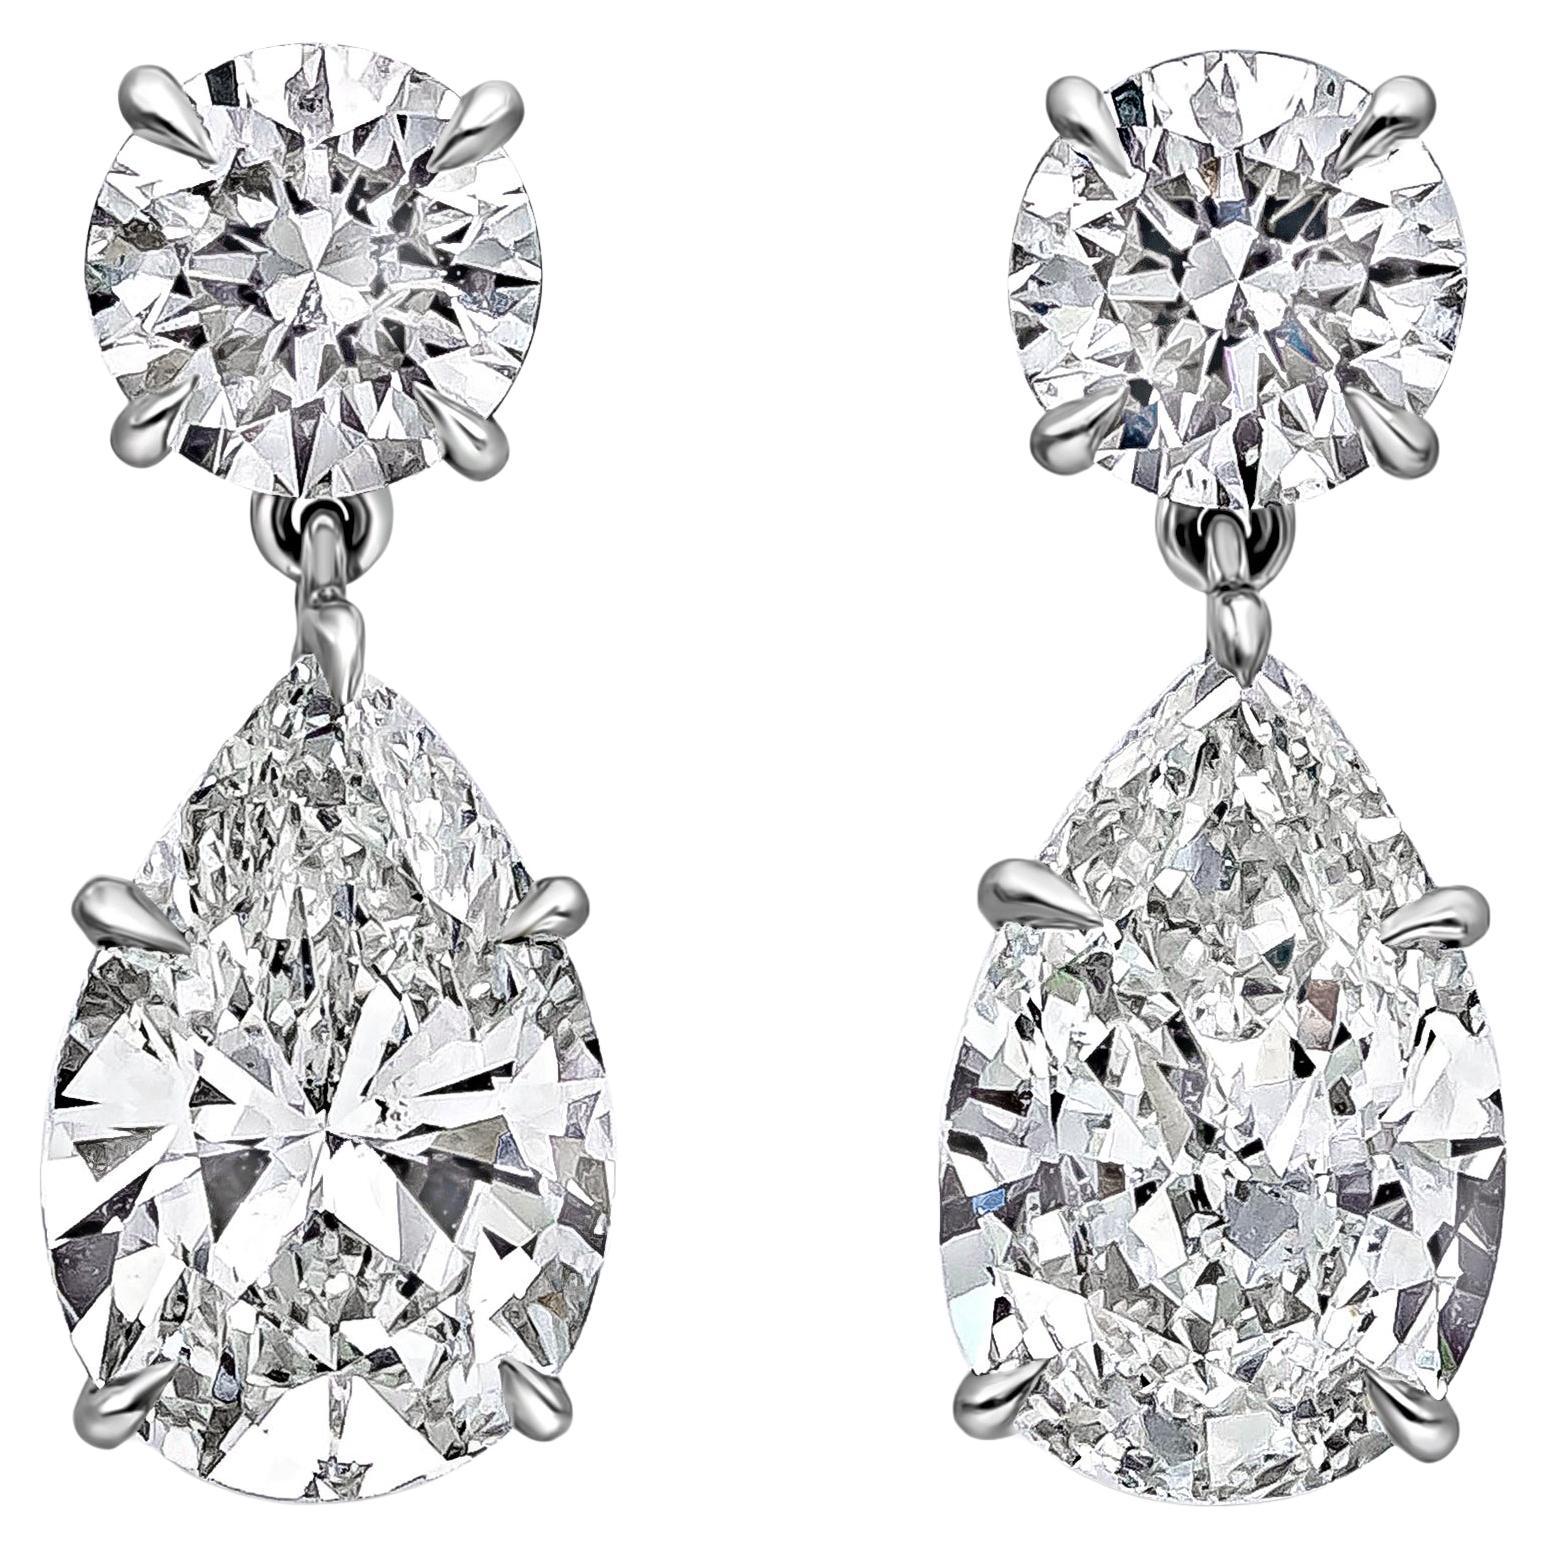 GIA Certified 5.43 Carat Total Pear and Round Diamond Dangle Drop Earrings